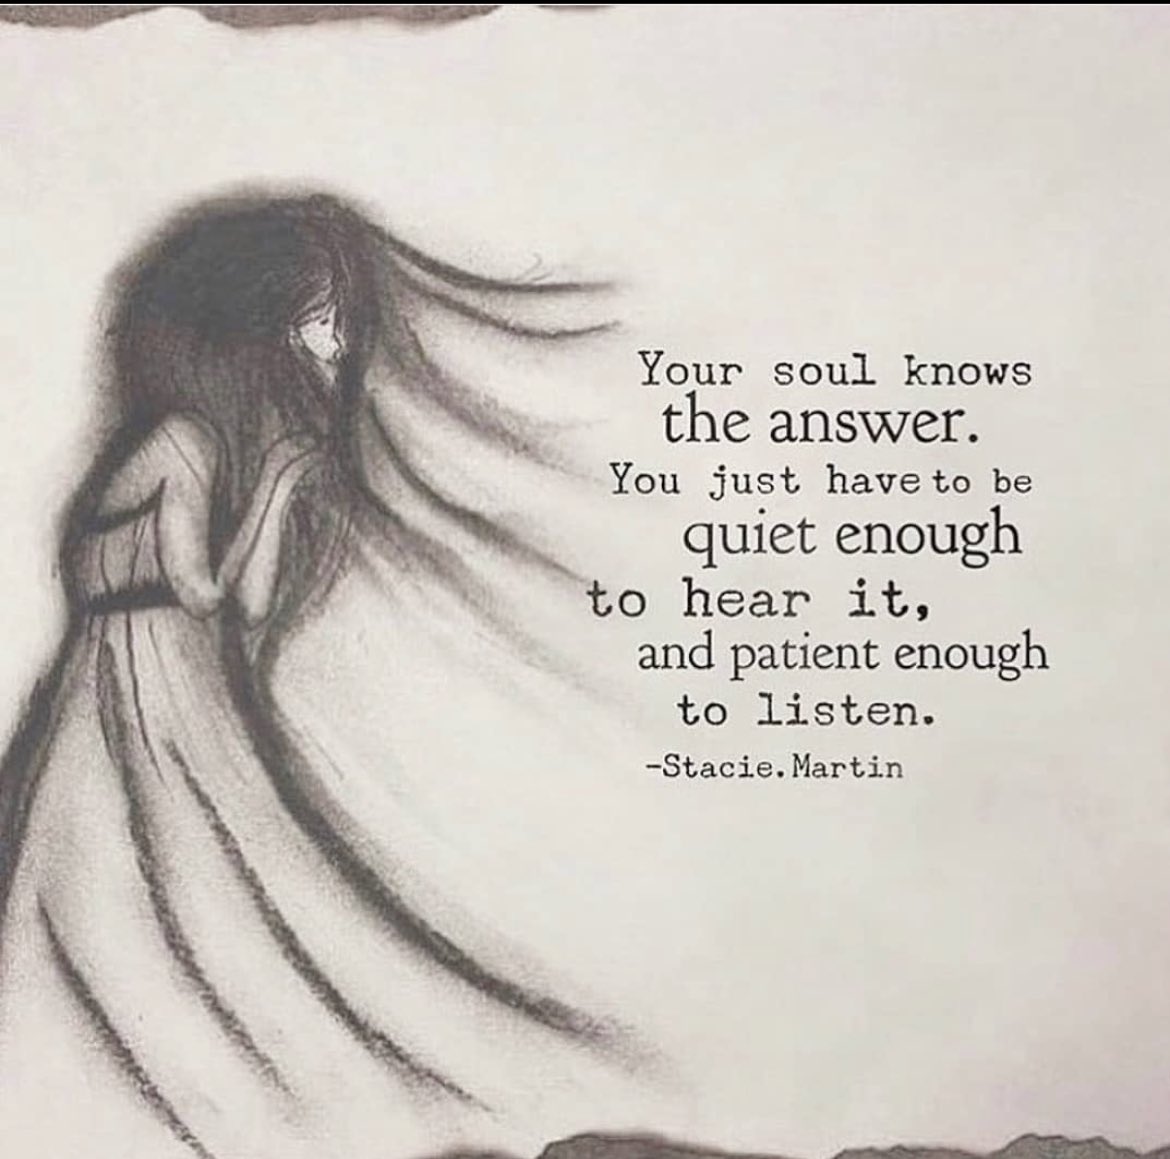 Your Soul Knows ✨ #SaturdayVibes #quoteoftheday #quotestoliveby #quotesaboutlife #soulquotes #soulknows #listentoyoursoul #hearit #selfcare #spirituality #spiritualawakening #SpiritualJourney #souljourney #soulgrowth #healing #healingjourney